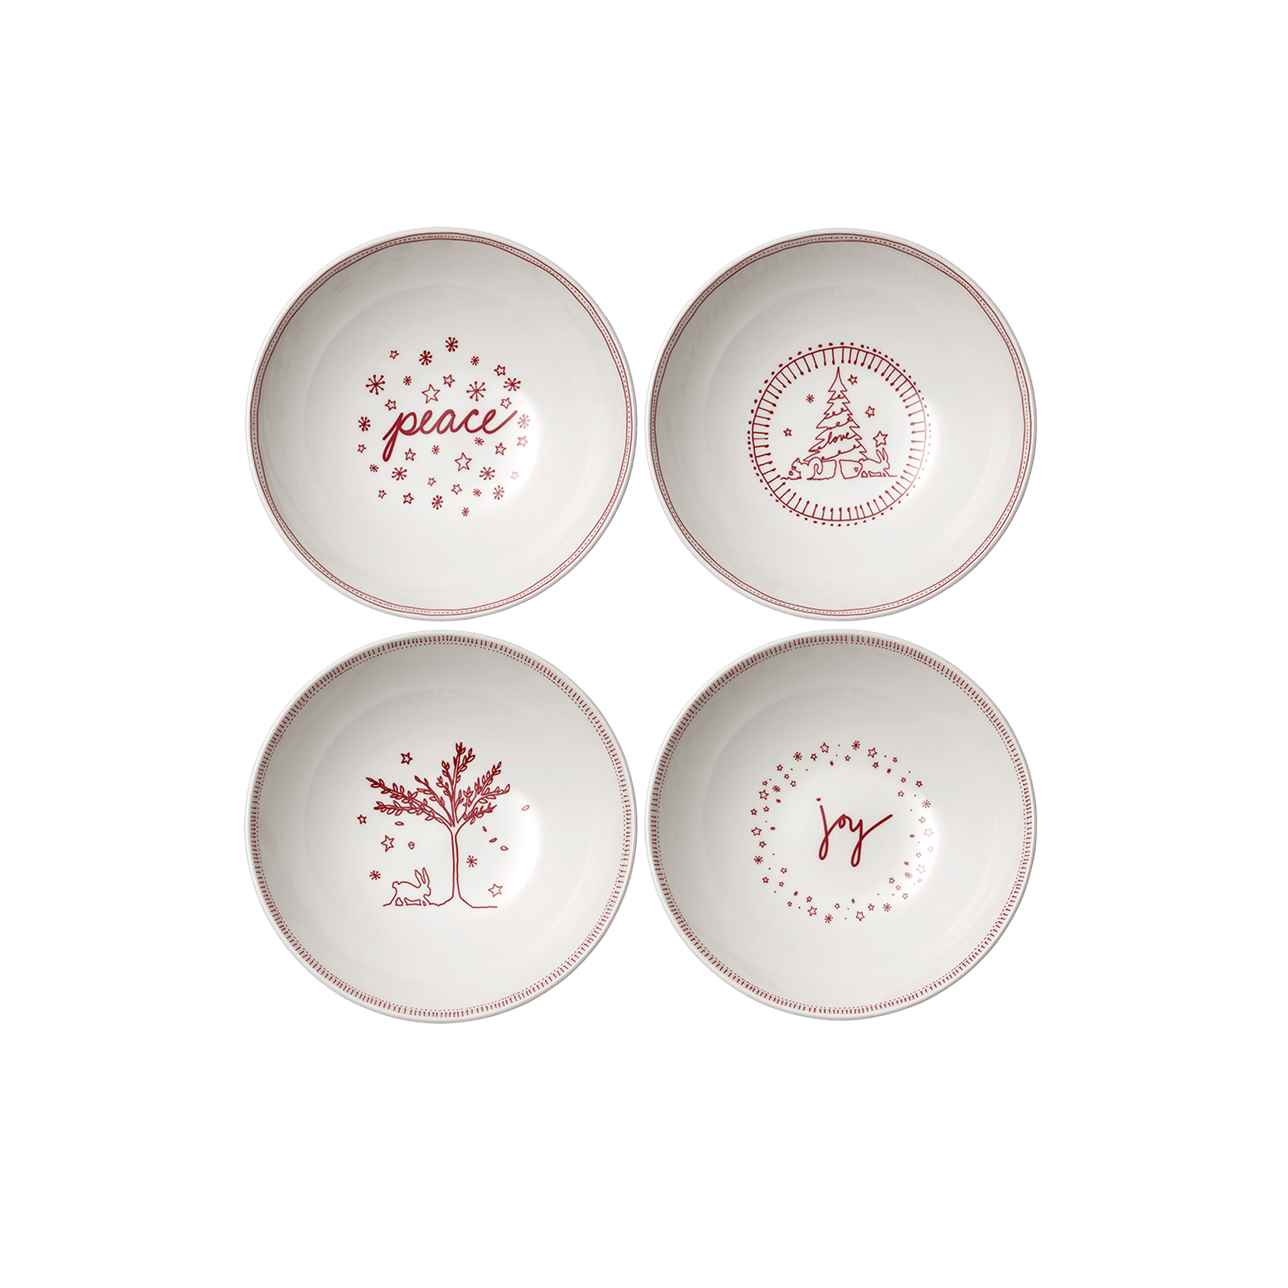 ED Holiday Cereal Bowls (Set of 4)